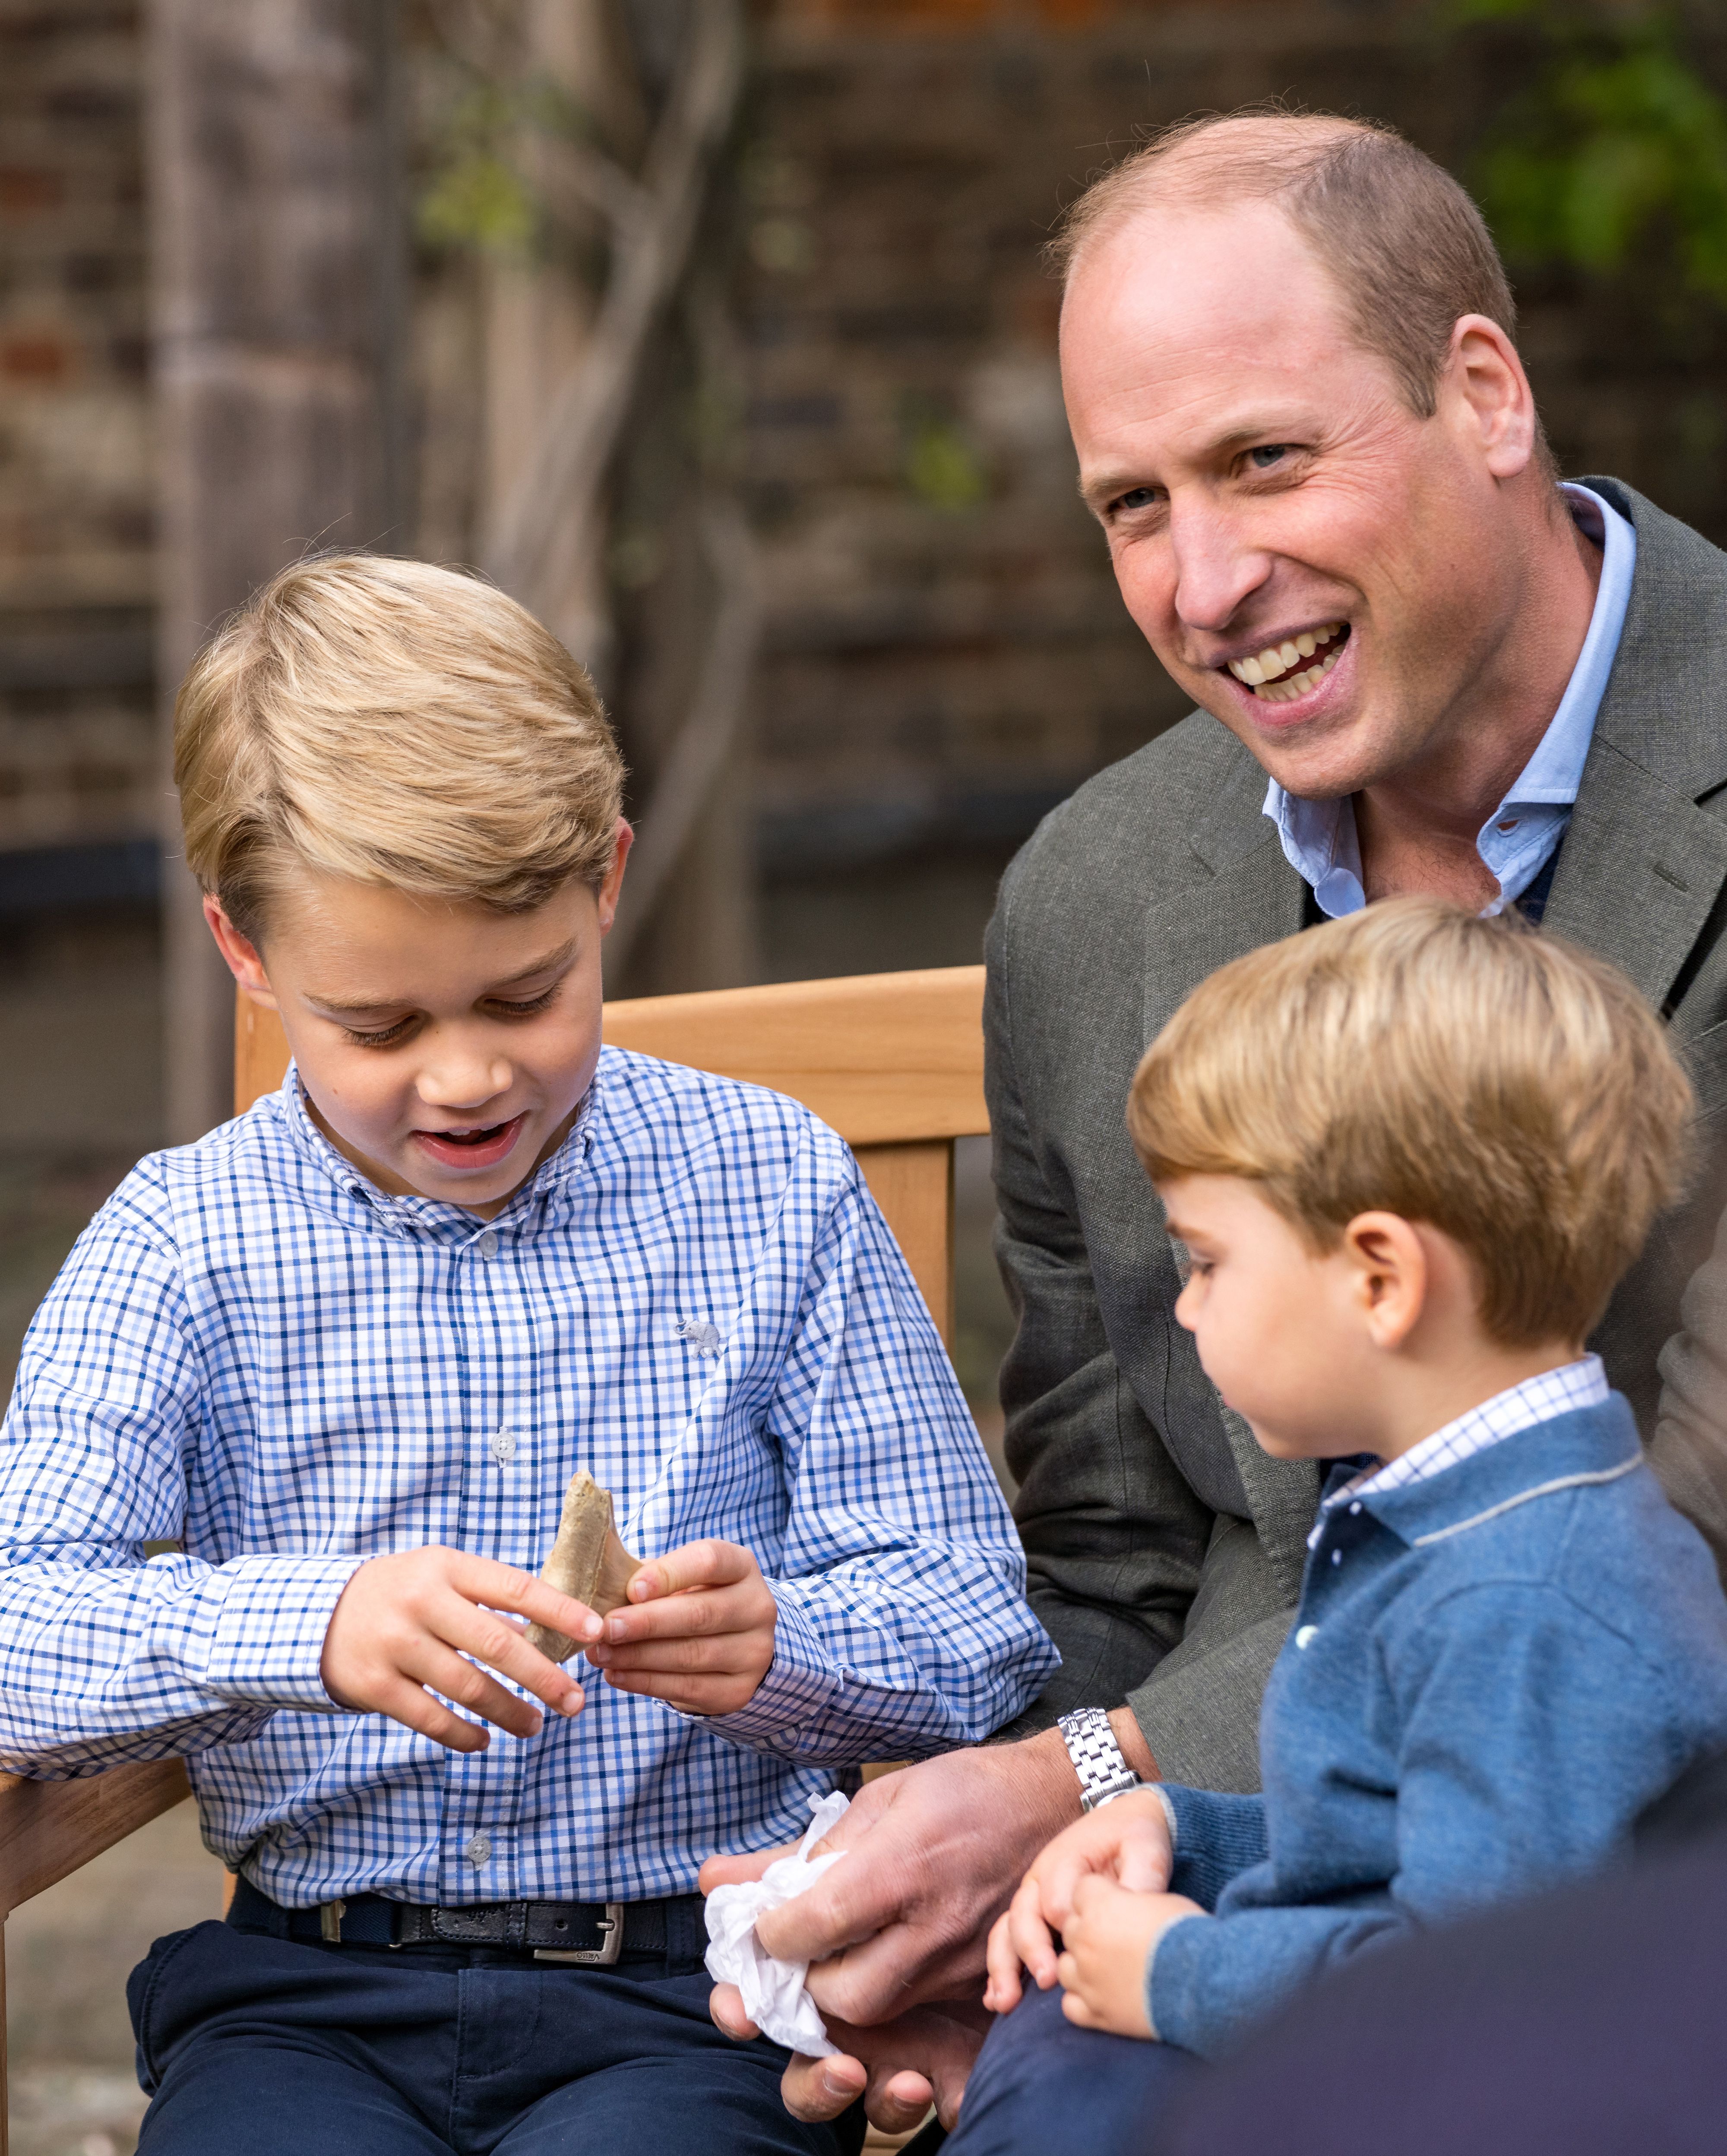 Prince George, Prince William, and Prince Louis in the gardens of Kensington Palace on September 24, 2020, in London, England | Photo: Getty Images